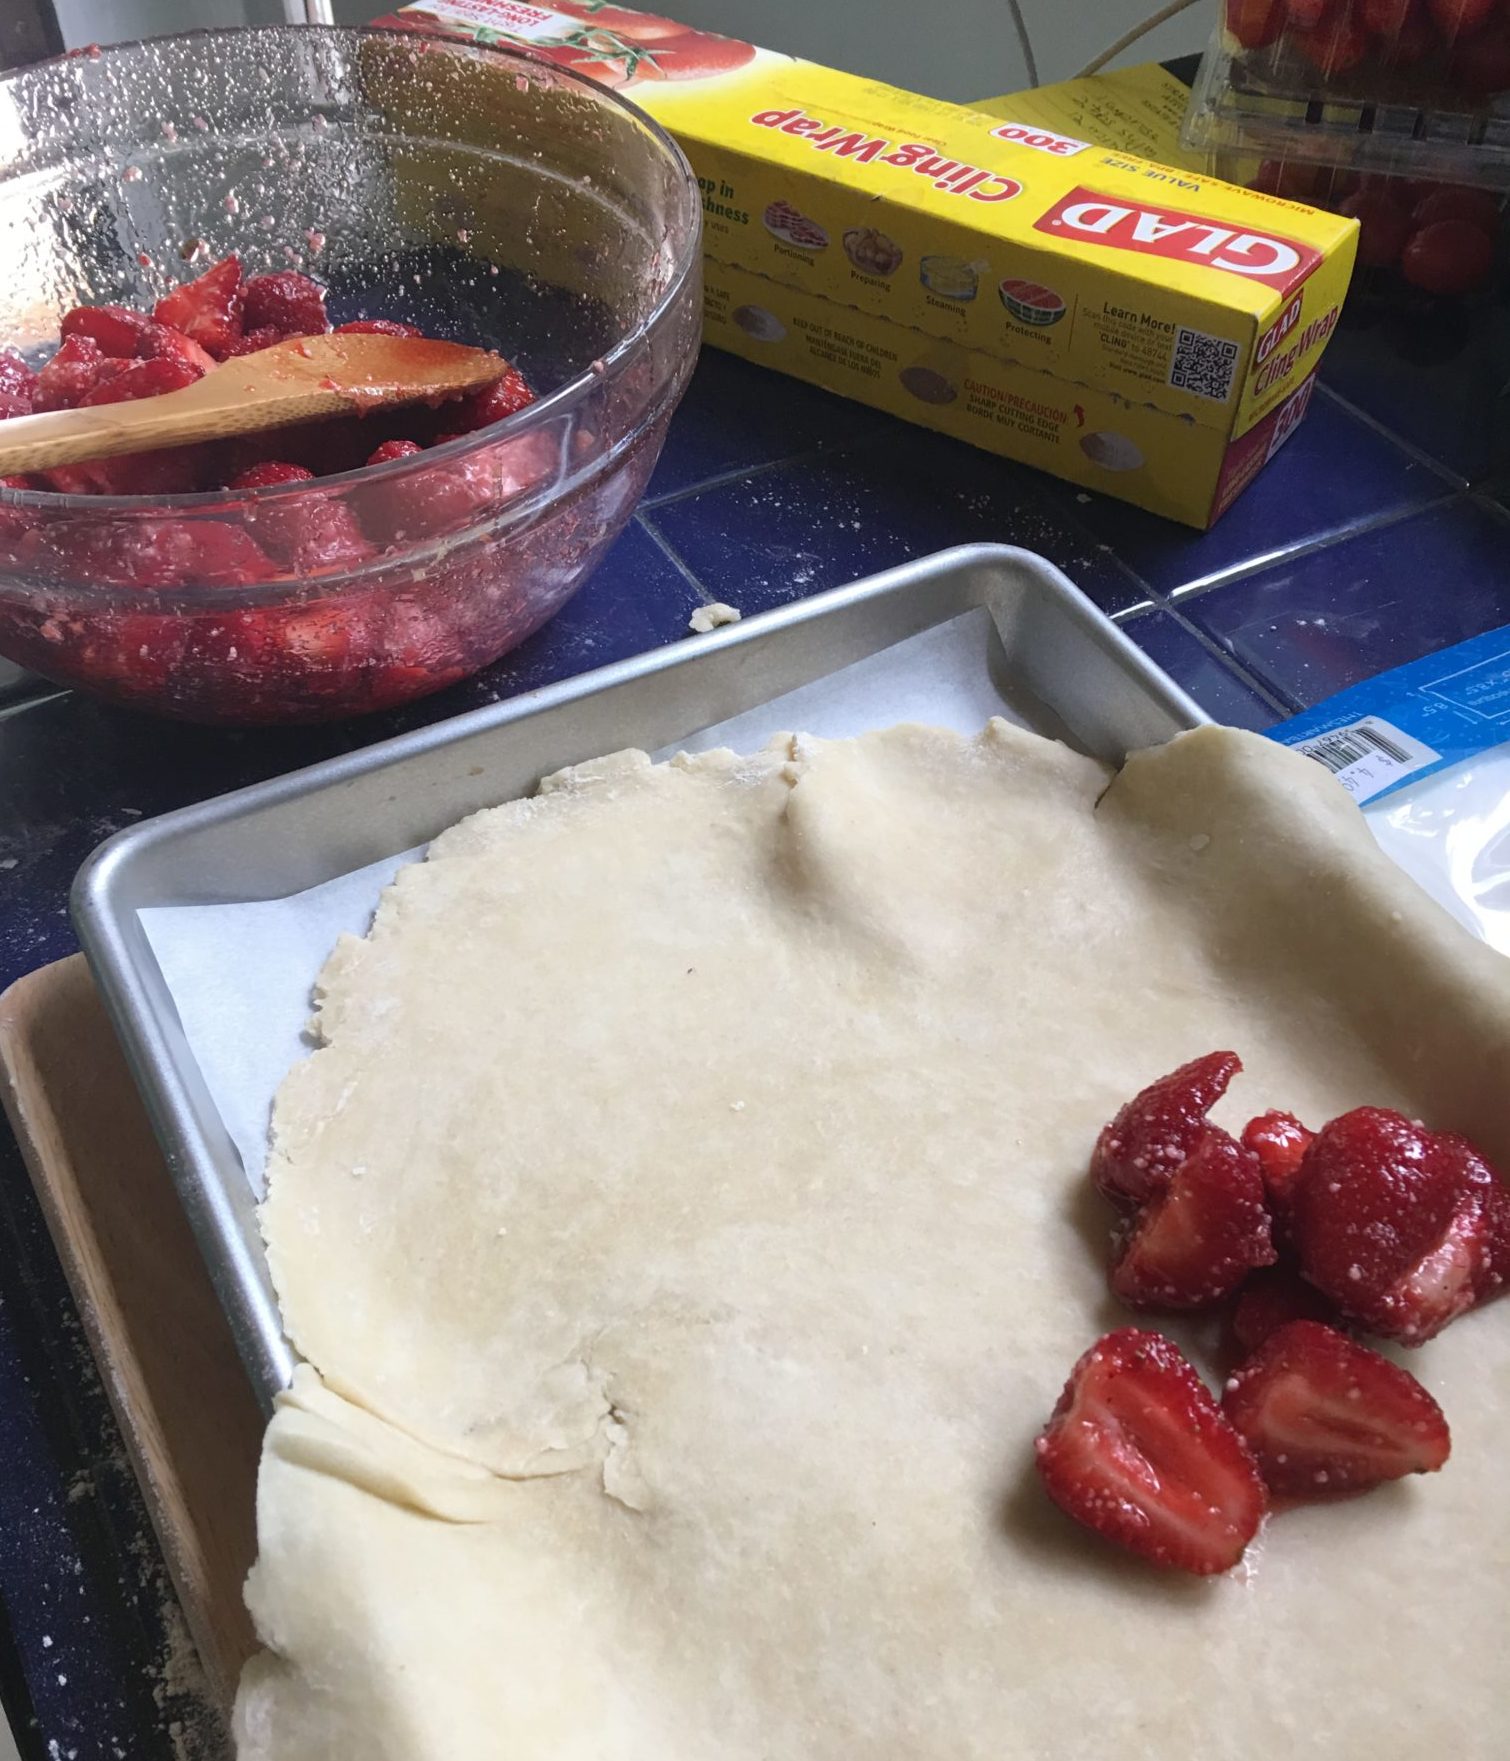 Mound the strawberries in the center of the pie crust